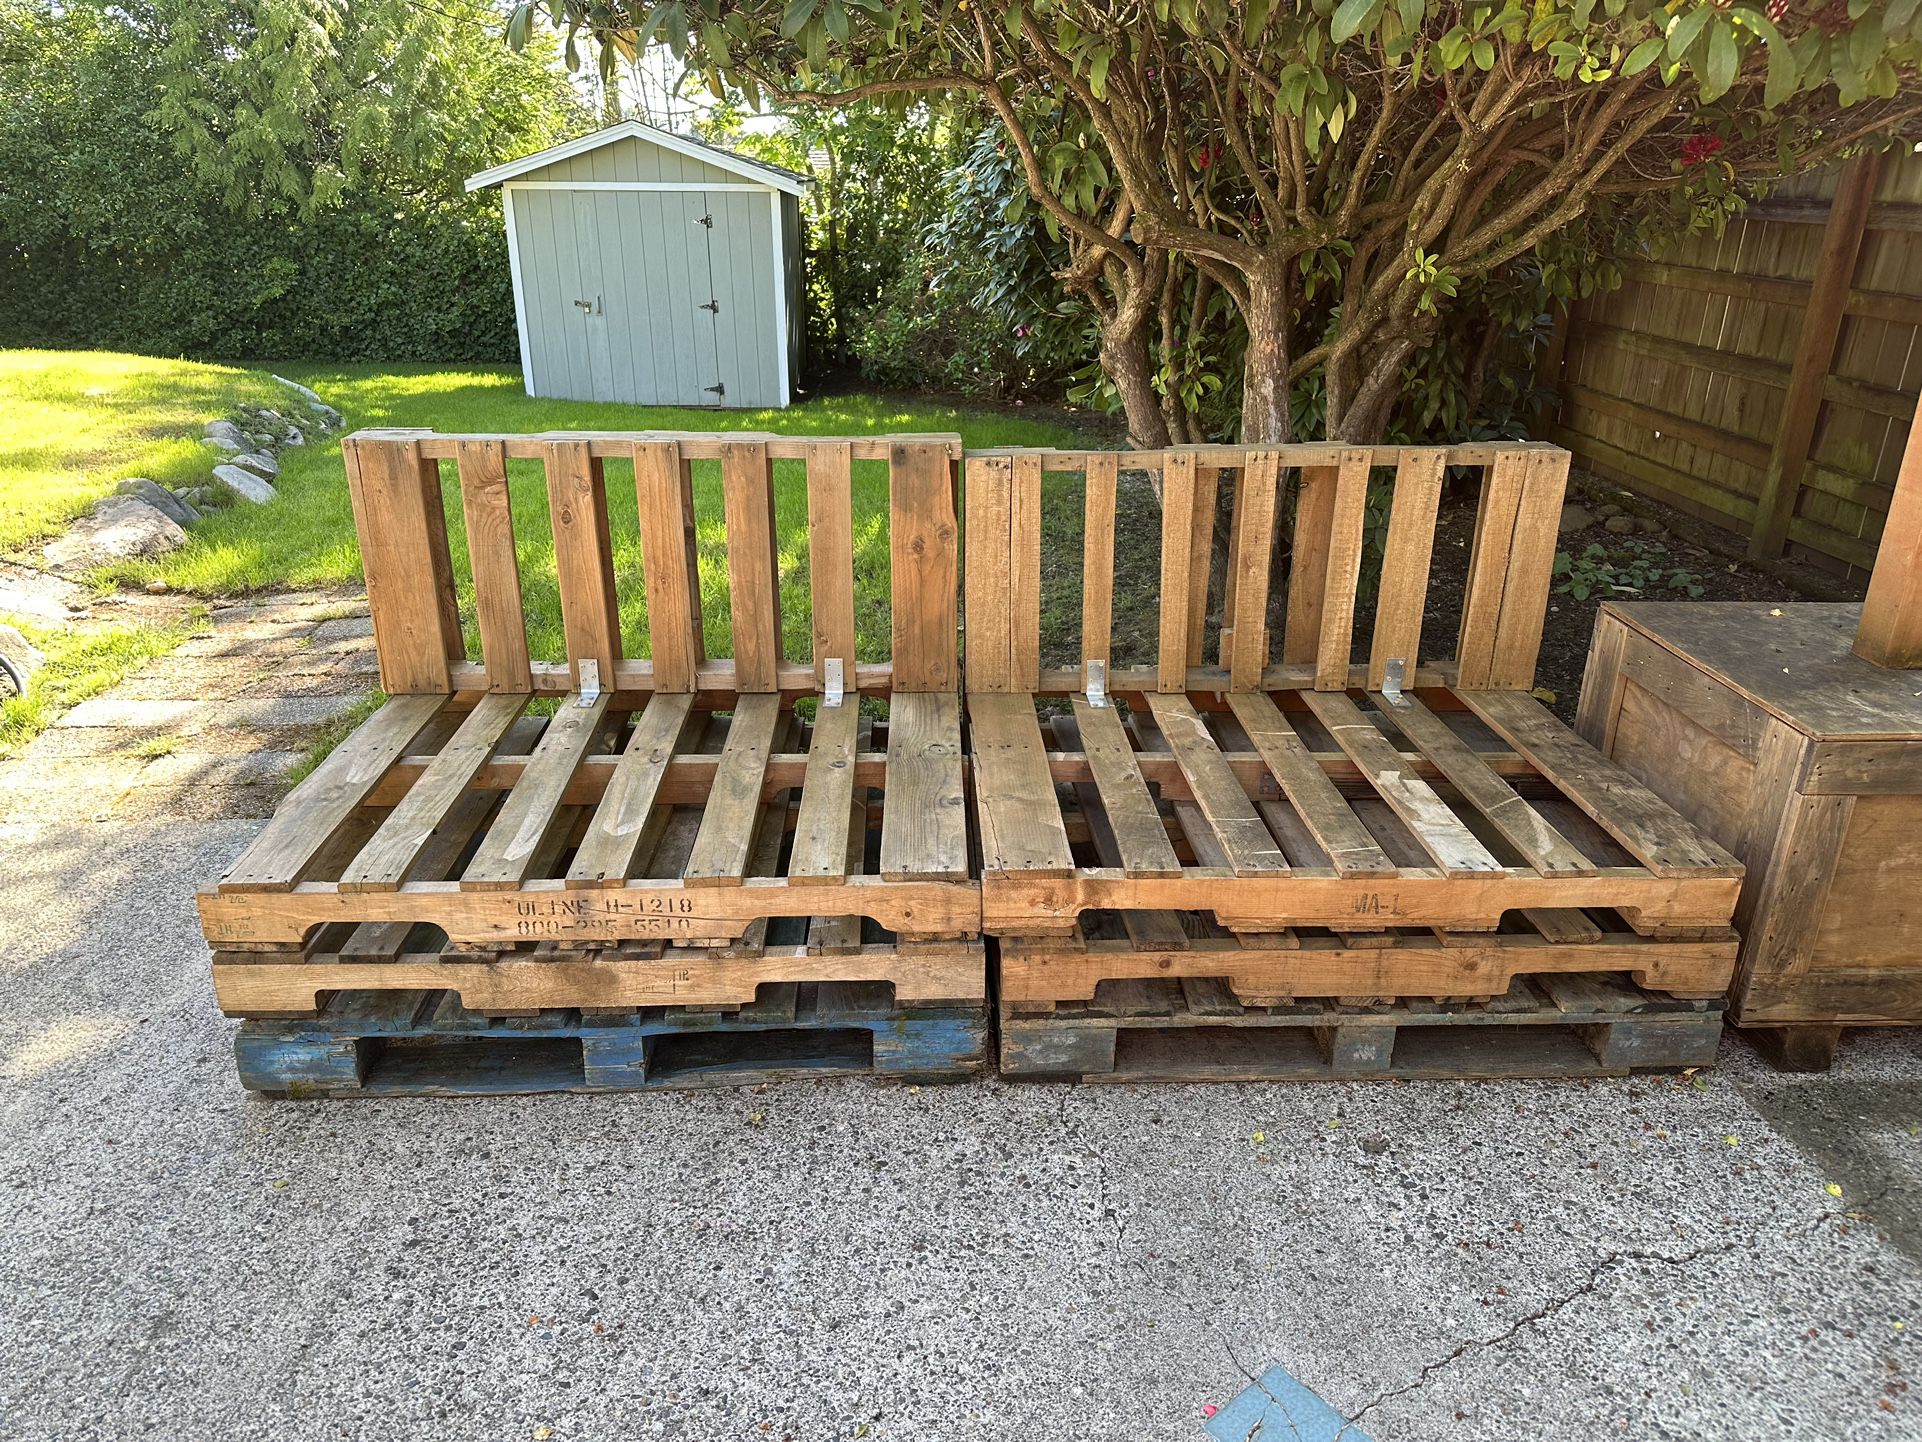 Pallet Couches $30 Each or Both For $50